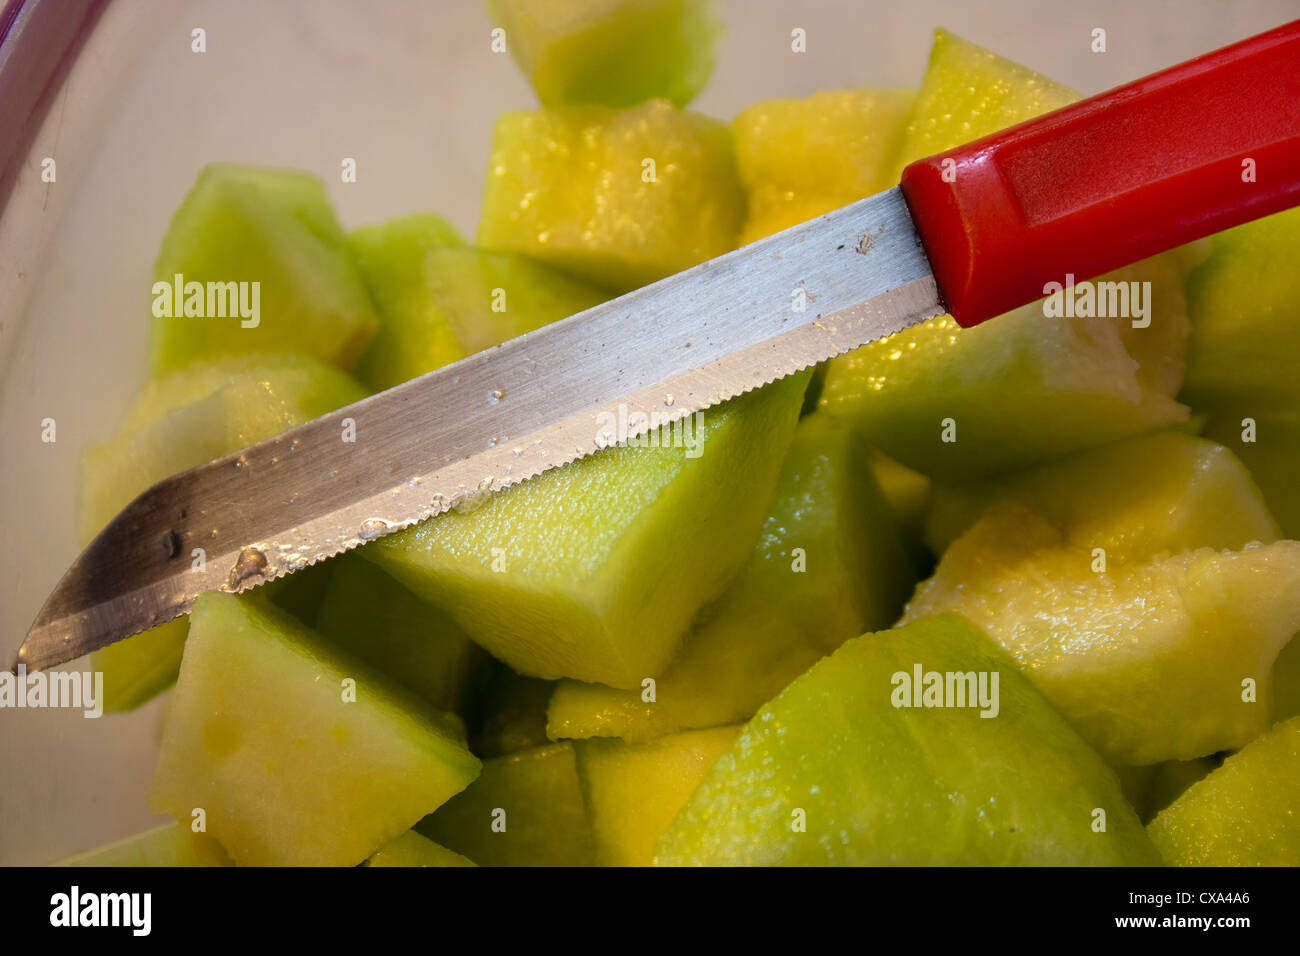 Macro (close up) photo of knife over bowl of cut musk melon. We were cutting some fruit at home, and I tried to get a macro shot Stock Photo